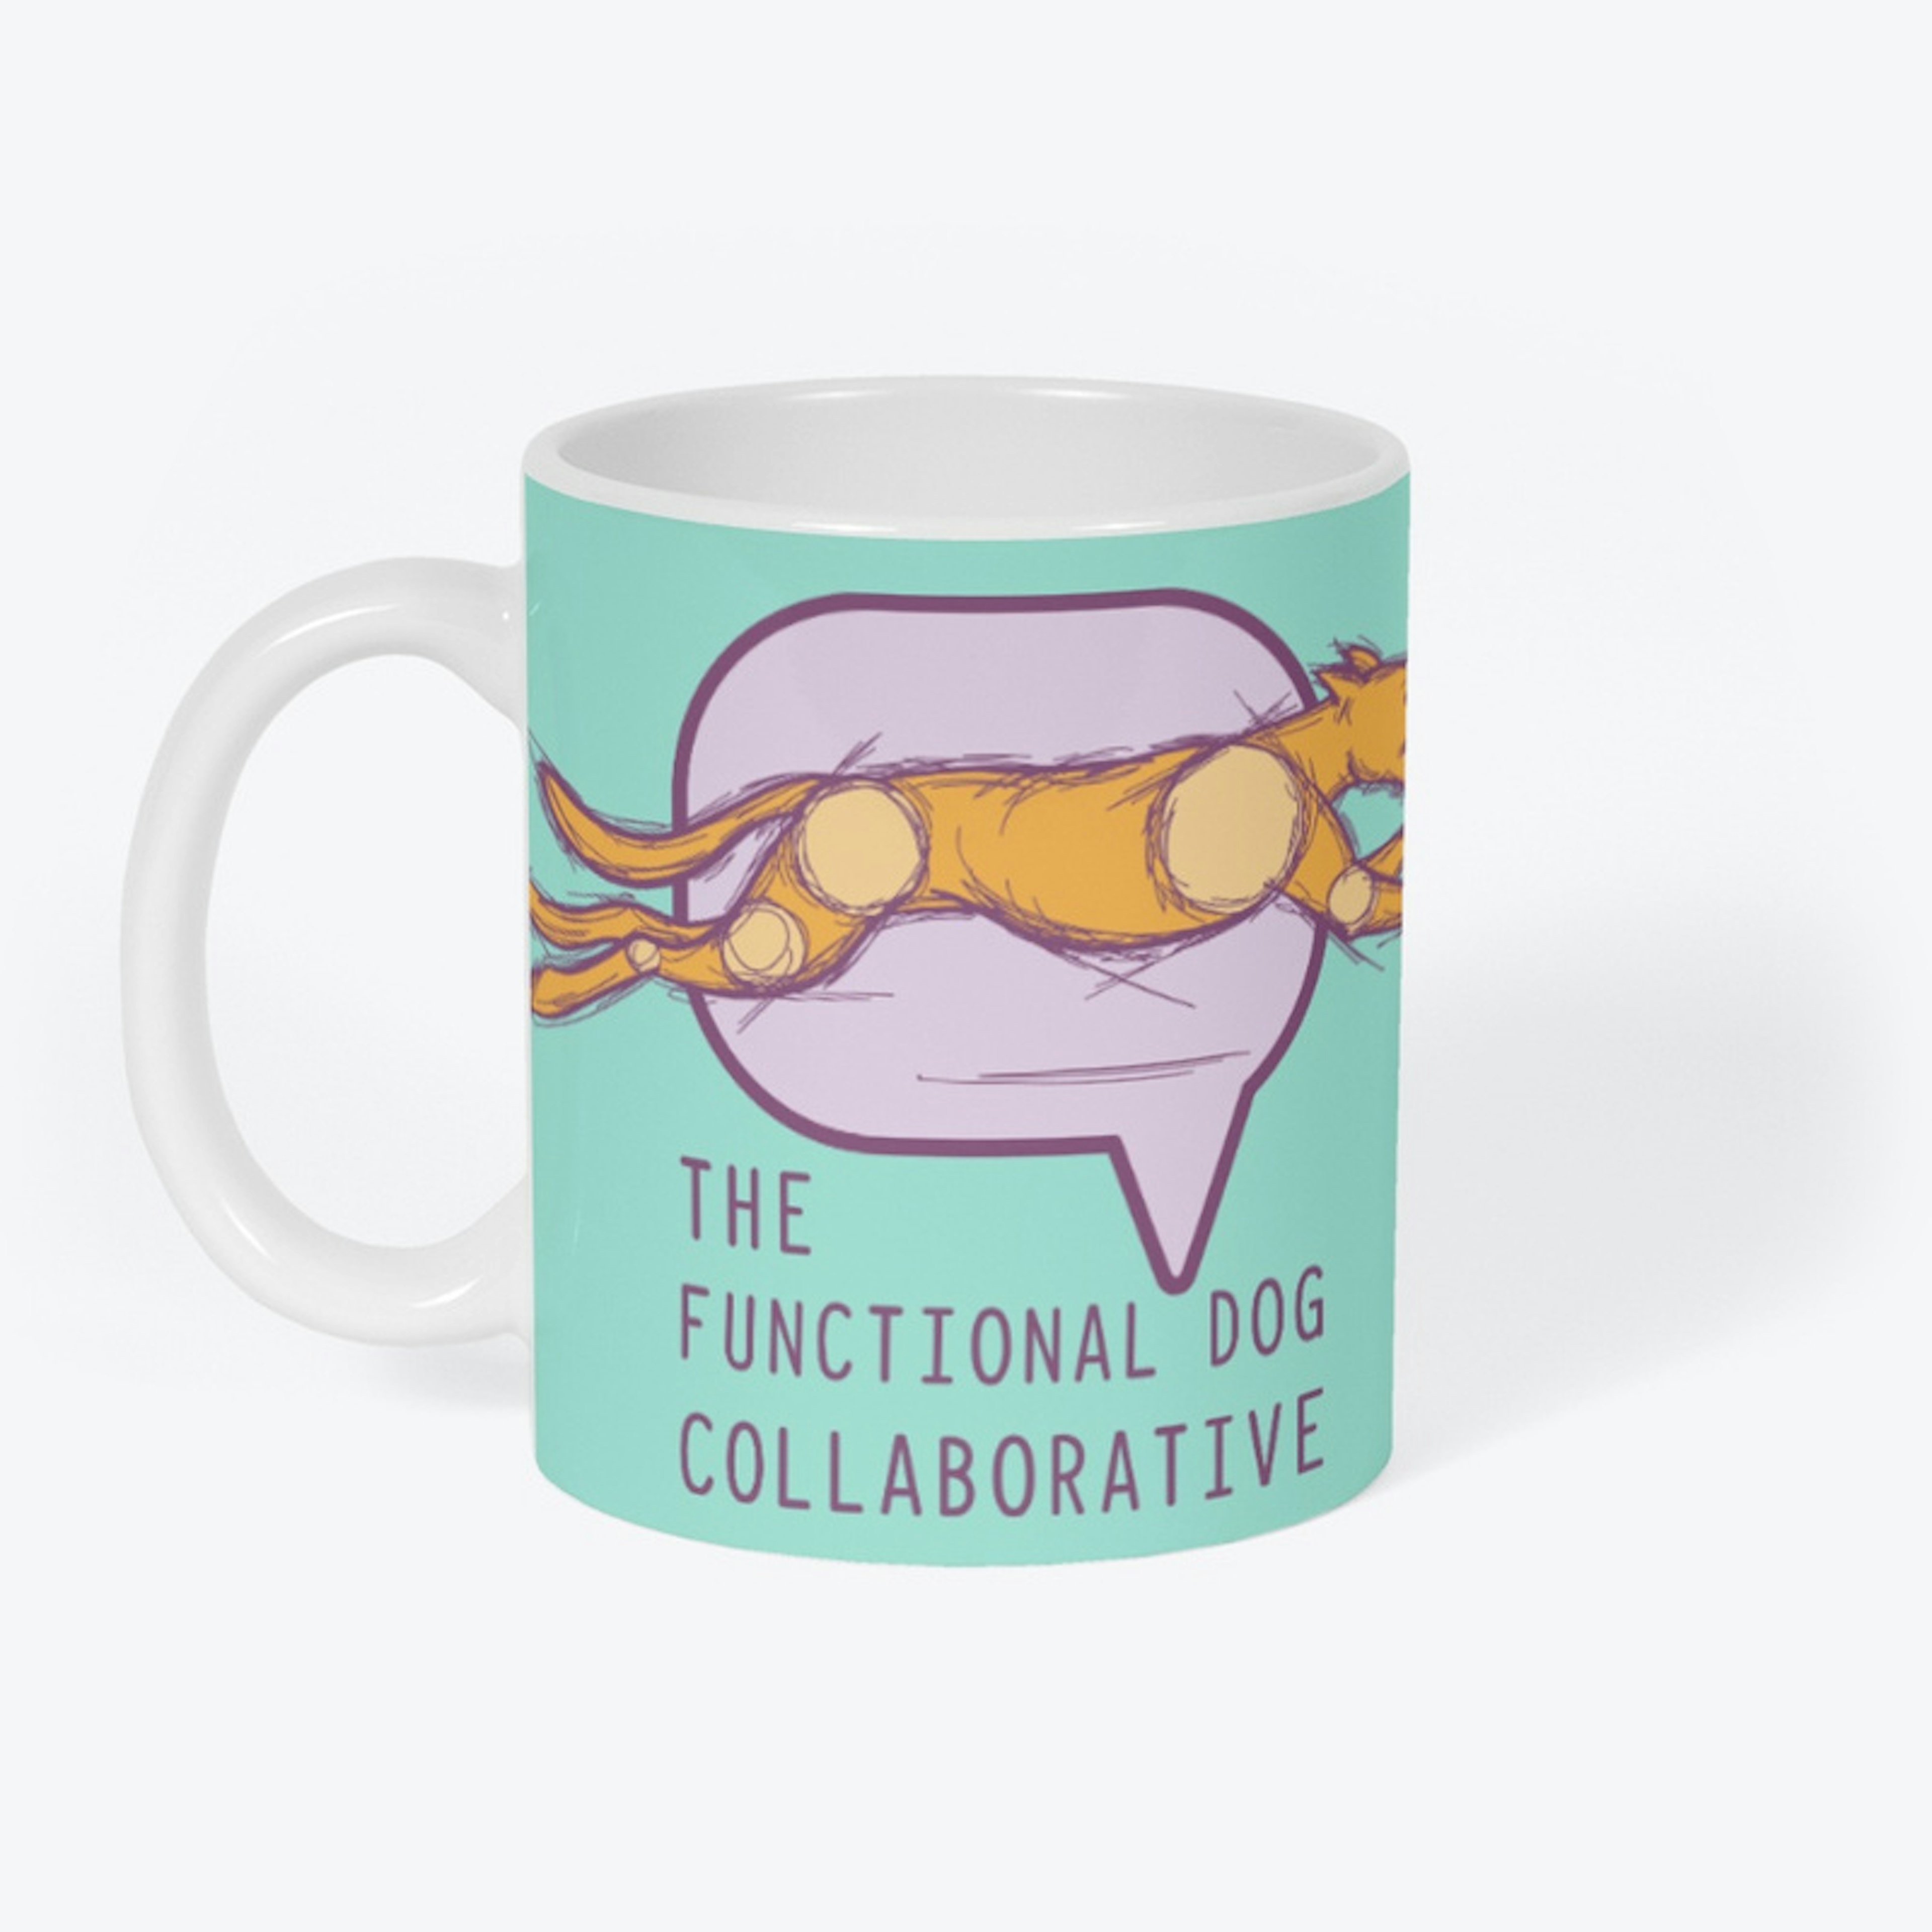 The Functional Dog Collaborative